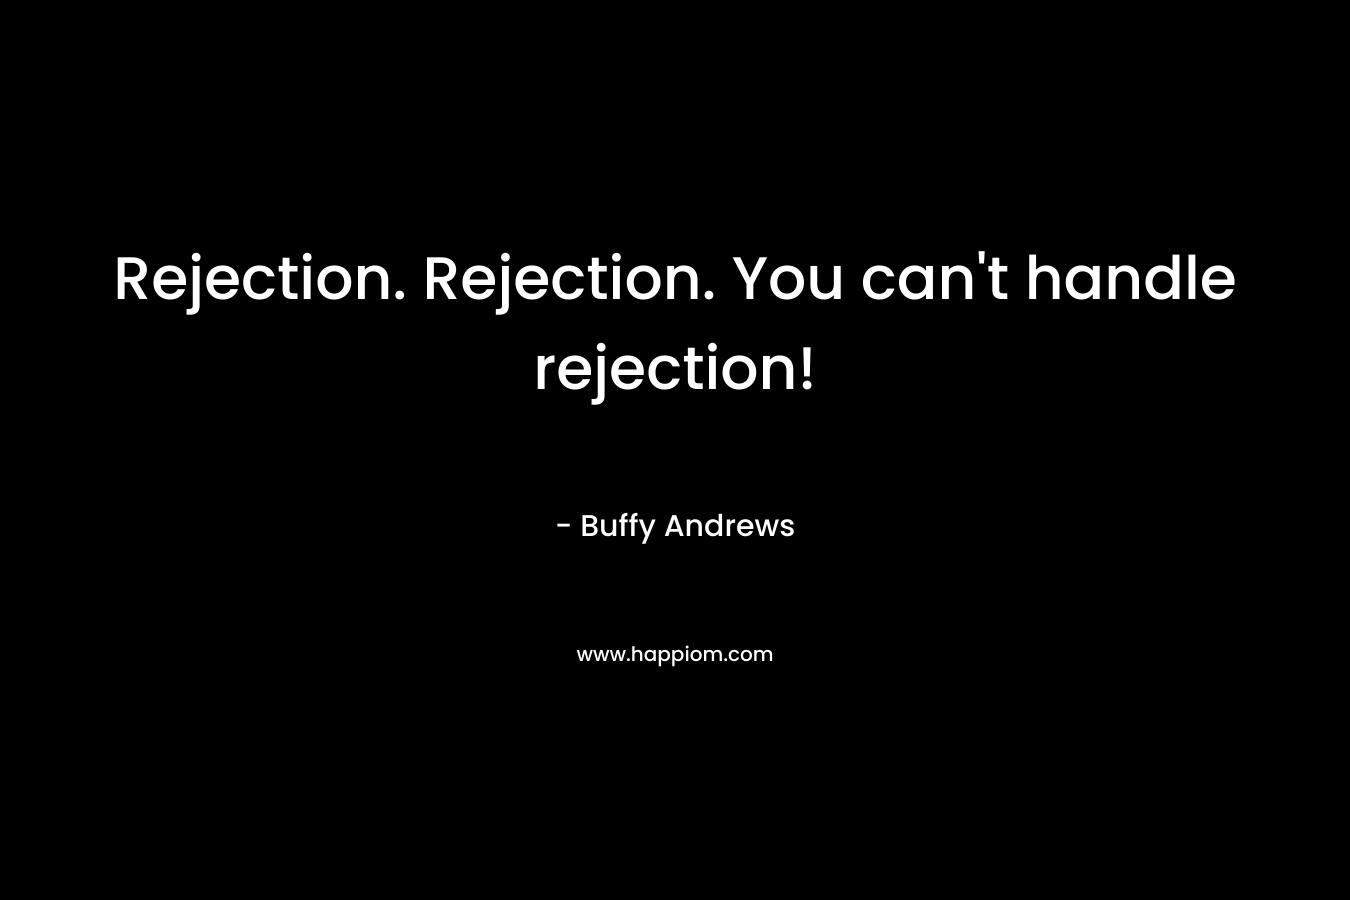 Rejection. Rejection. You can’t handle rejection! – Buffy Andrews